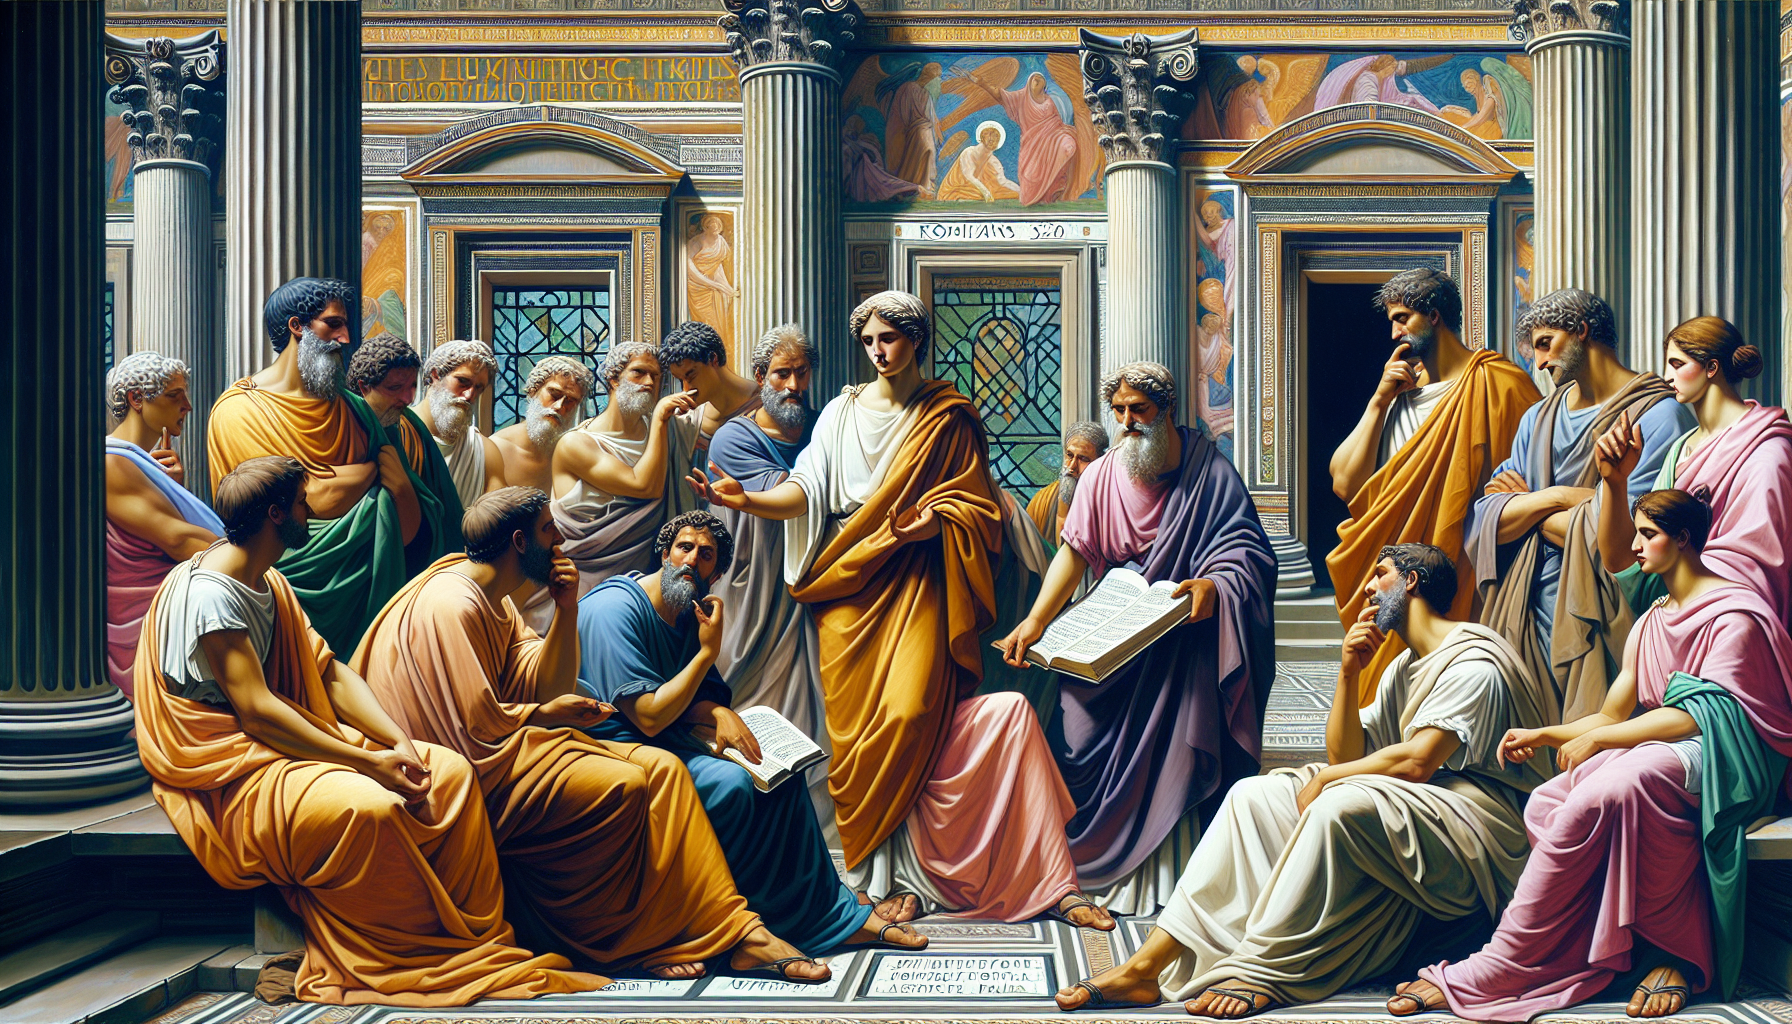 An artist's depiction of ancient Roman figures in togas, gathered around and discussing the scripture from Romans 3:20, in a setting blending early Christian iconography with classical Roman architect